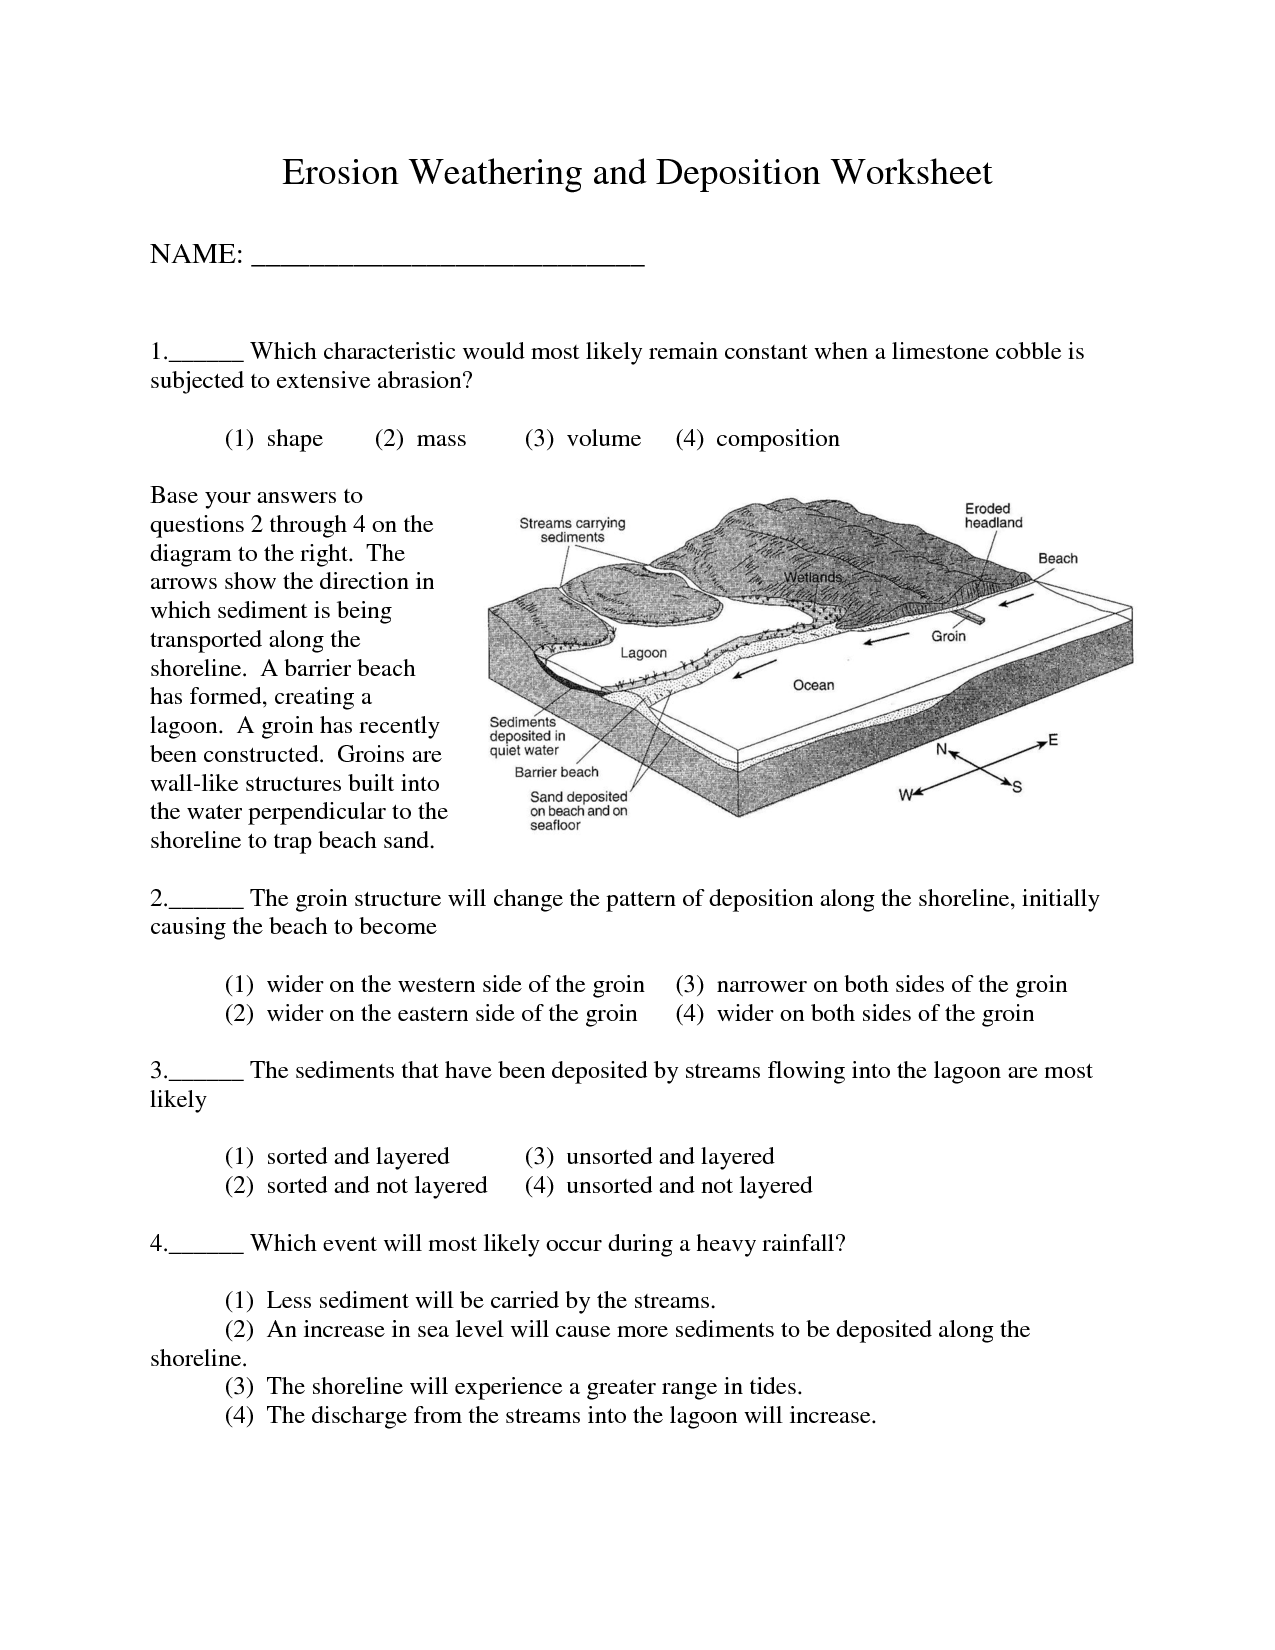 Soil Formation Worksheet Answers